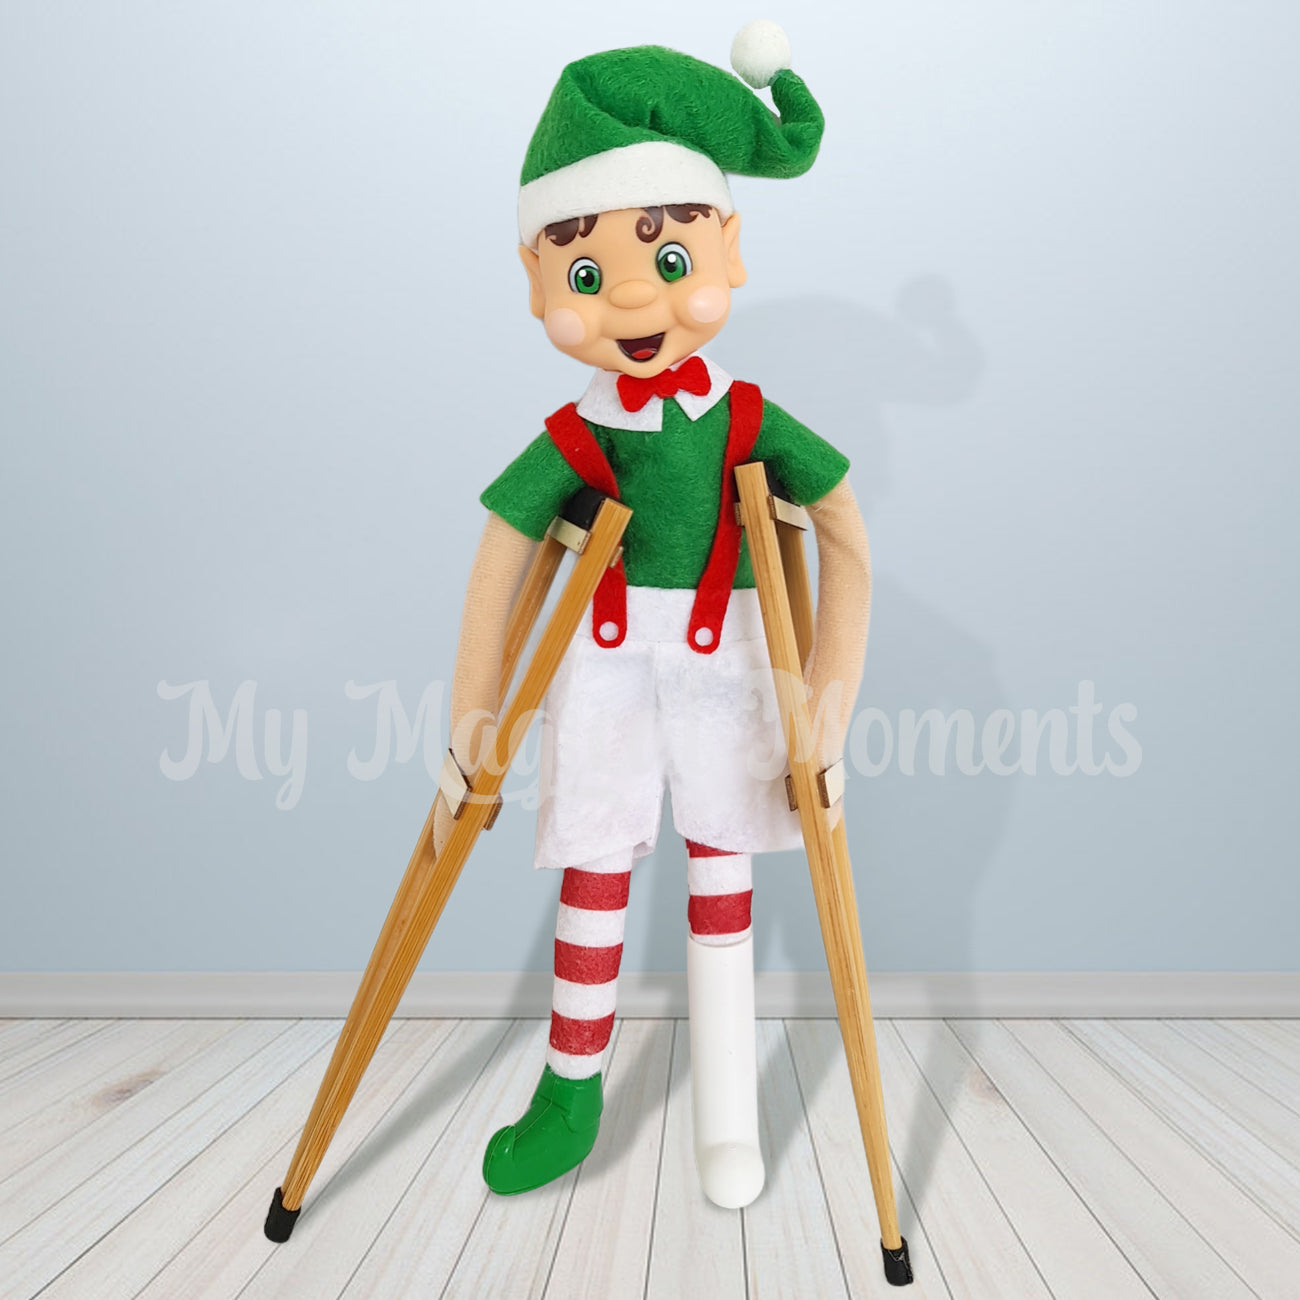 My elf friend with brown hair holding his crutches with a broken foot. In a miniature leg cast